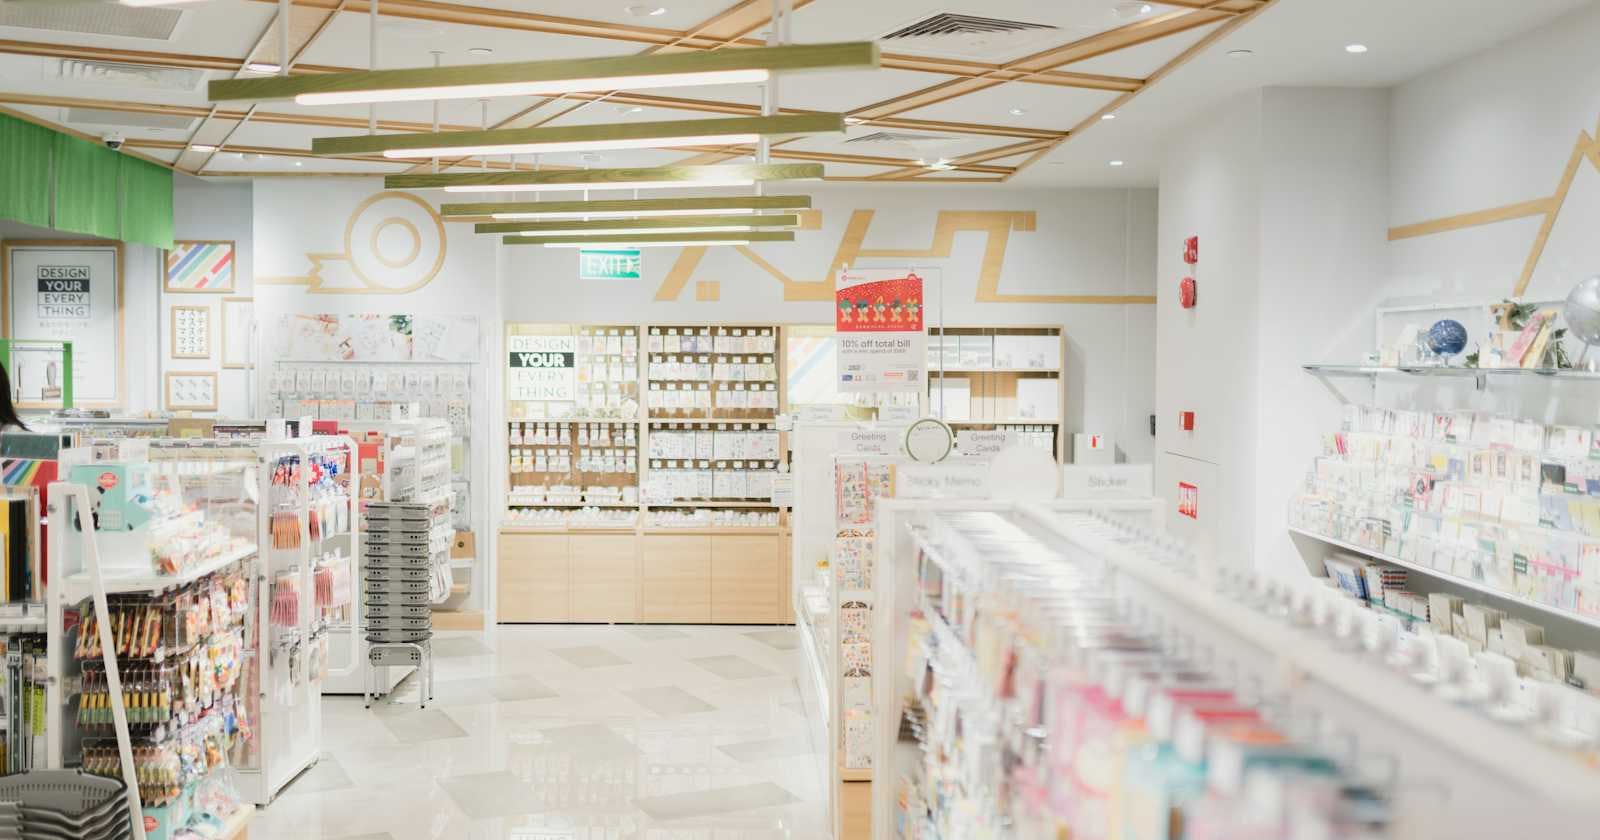 Why does your Data Warehouse need to look more like a pharmacy than a retail store?